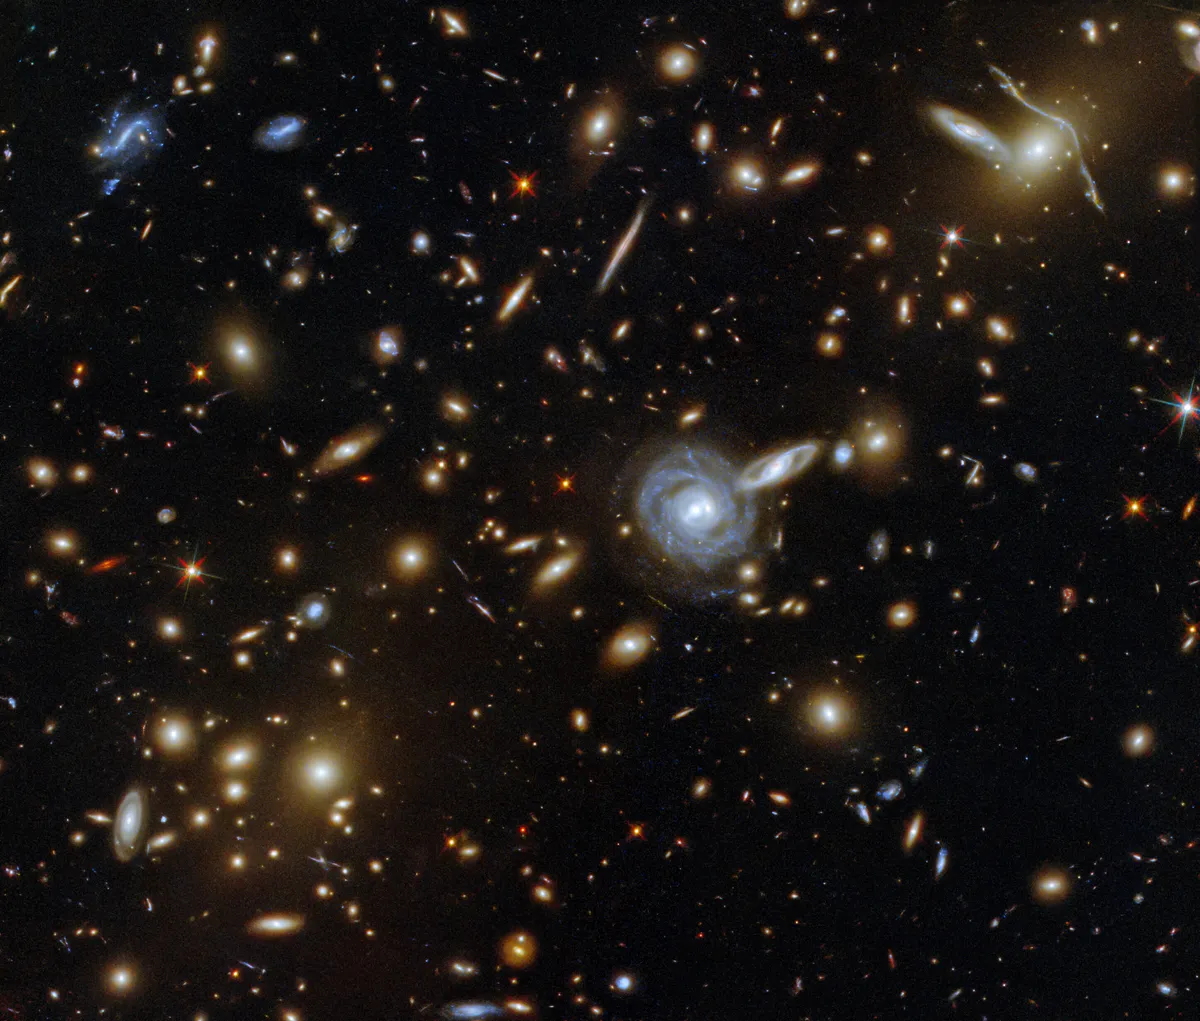 Galaxy cluster Abell S0295 HUBBLE SPACE TELESCOPE, 17 MAY 2021 CREDIT: ESA/Hubble & NASA, F. Pacaud, D. Coe